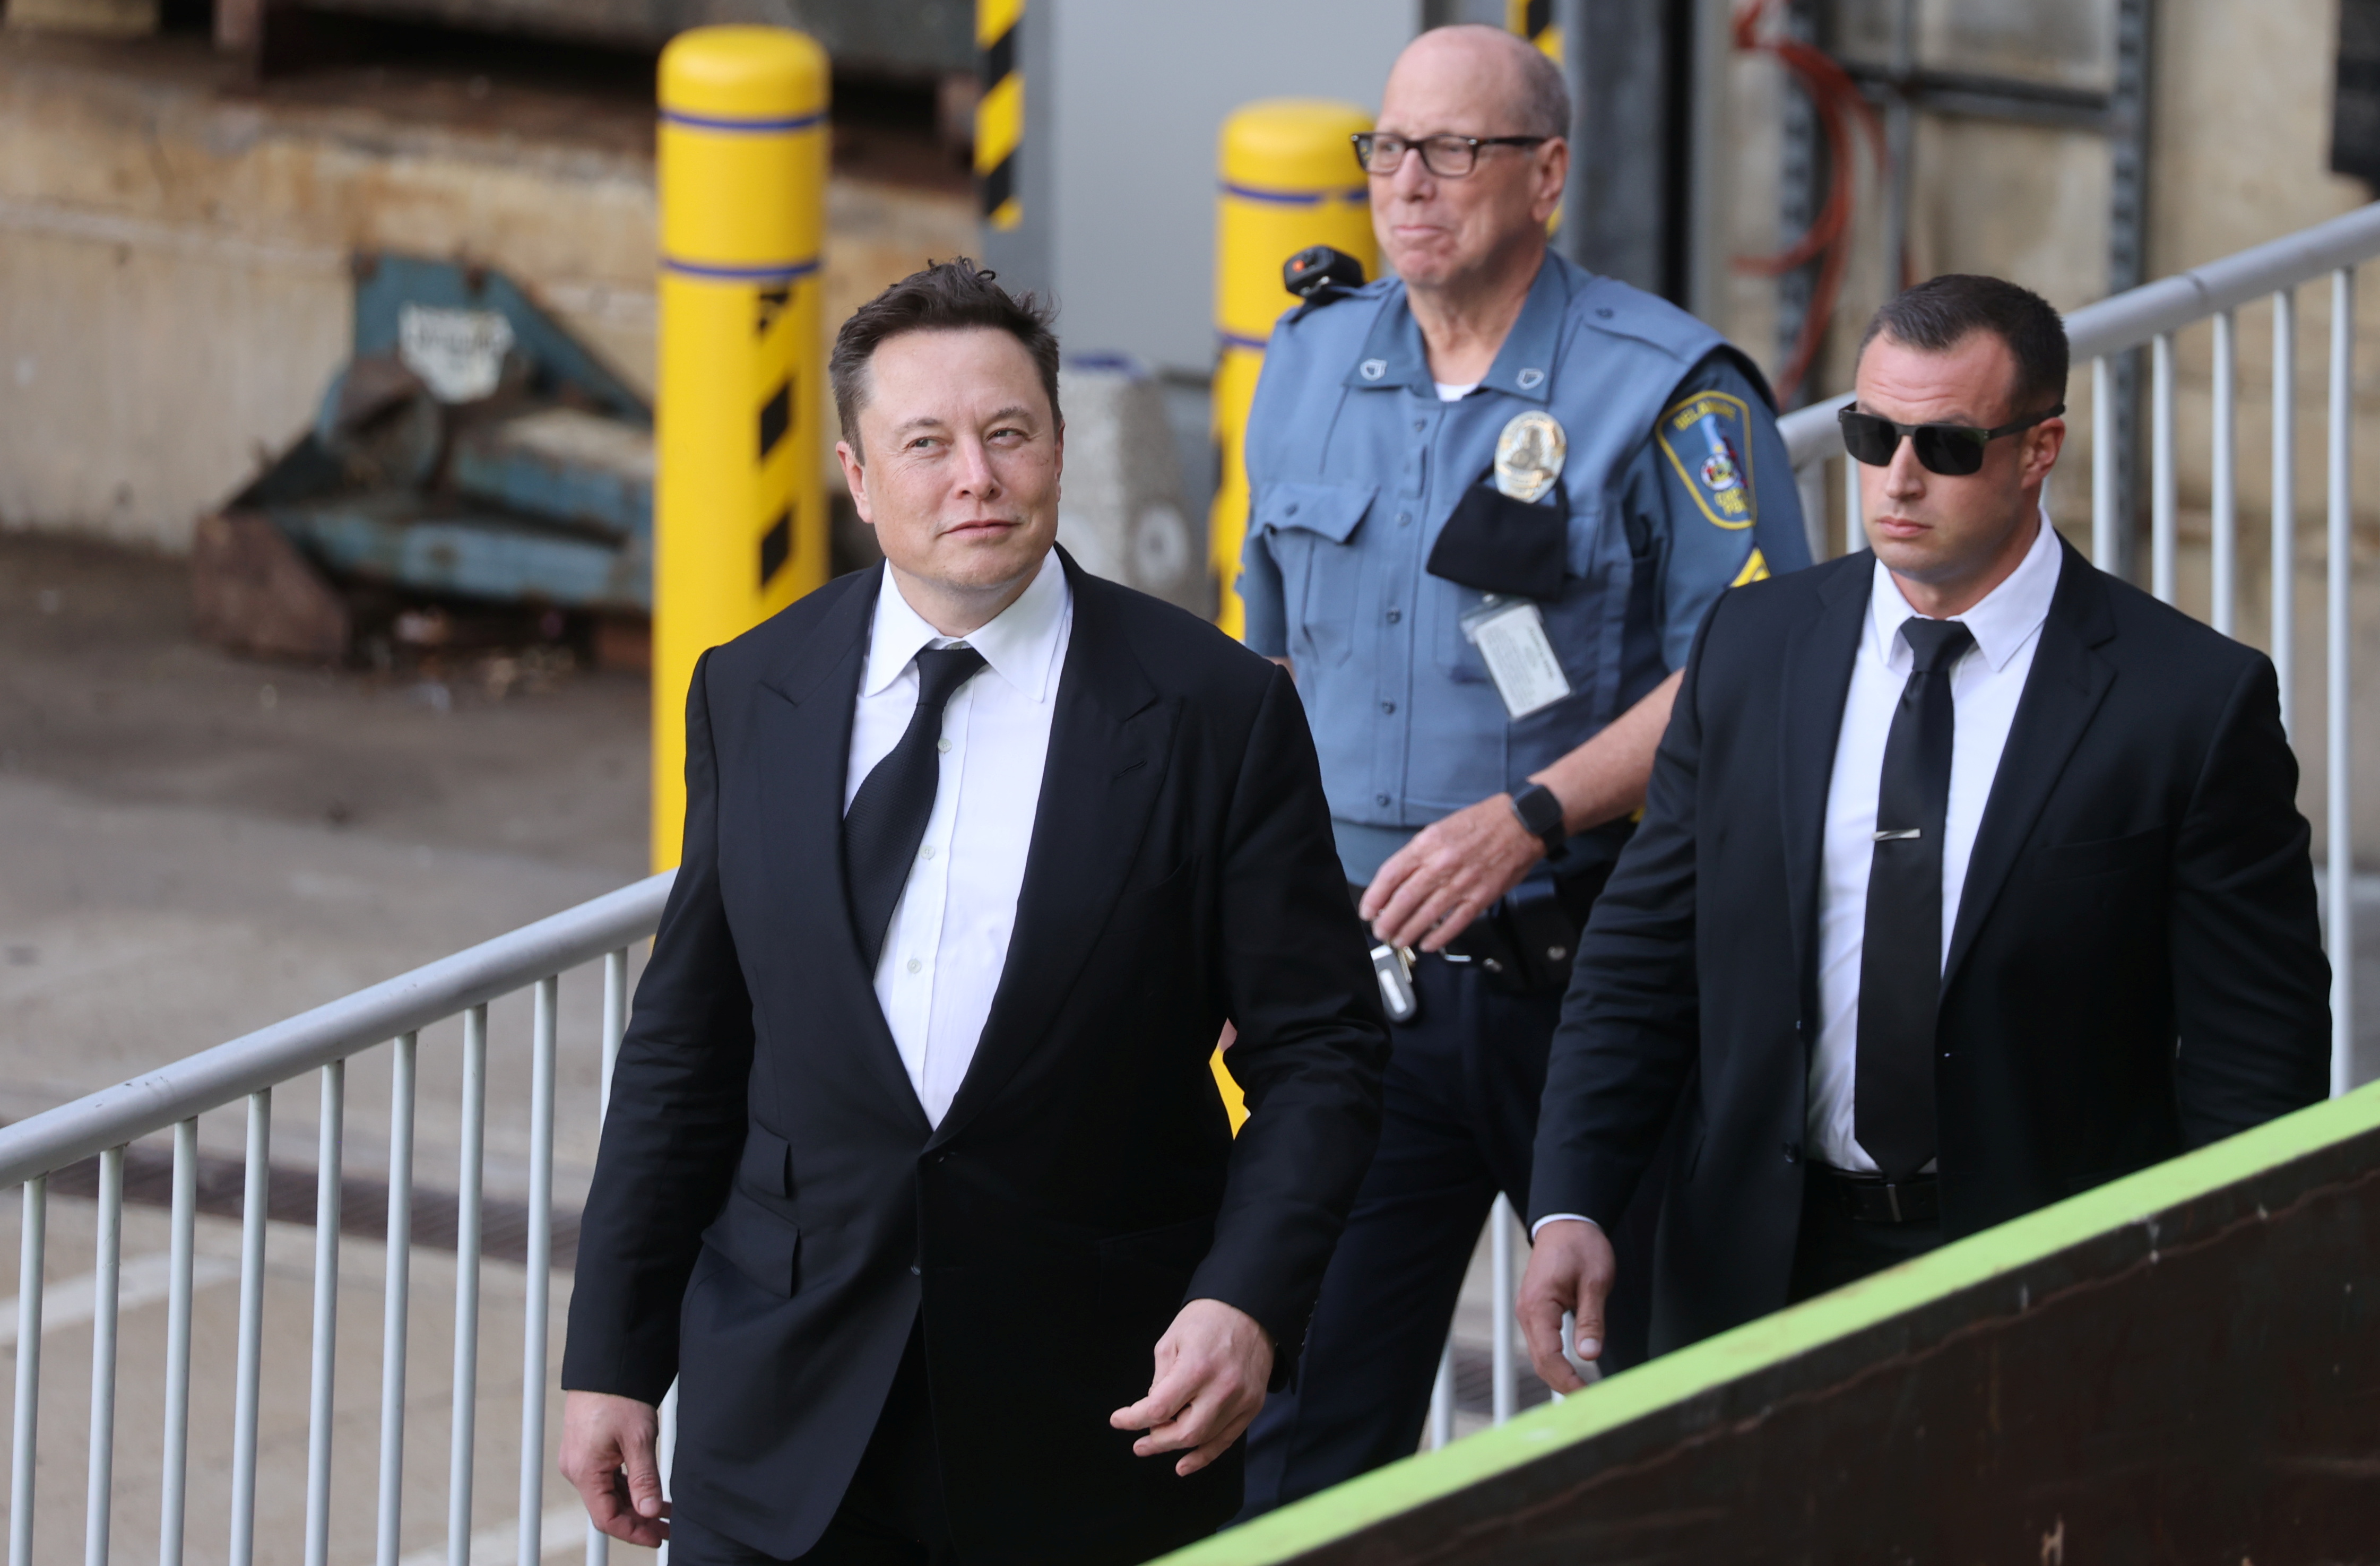 Tesla CEO Elon Musk defends Tesla Inc's 2016 deal before the Delaware Court of Chancery in Wilmington